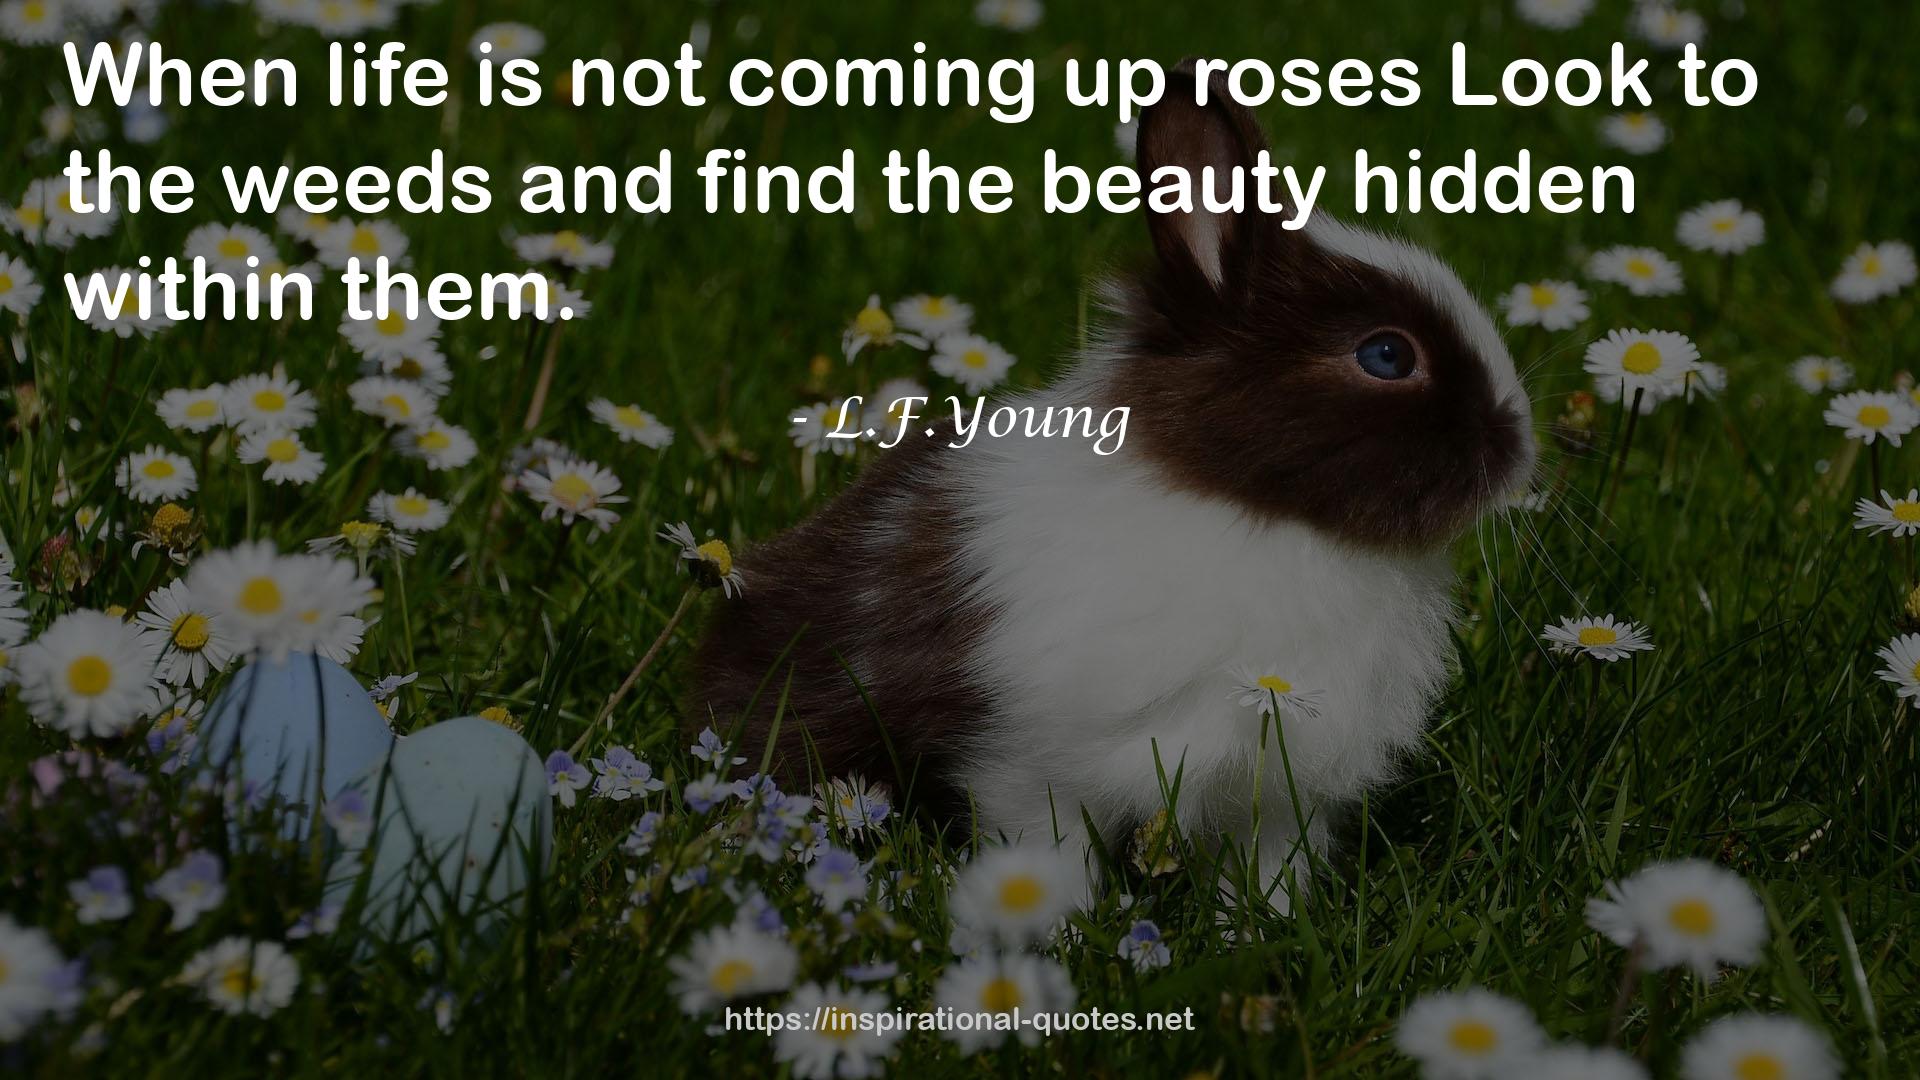 L.F.Young QUOTES